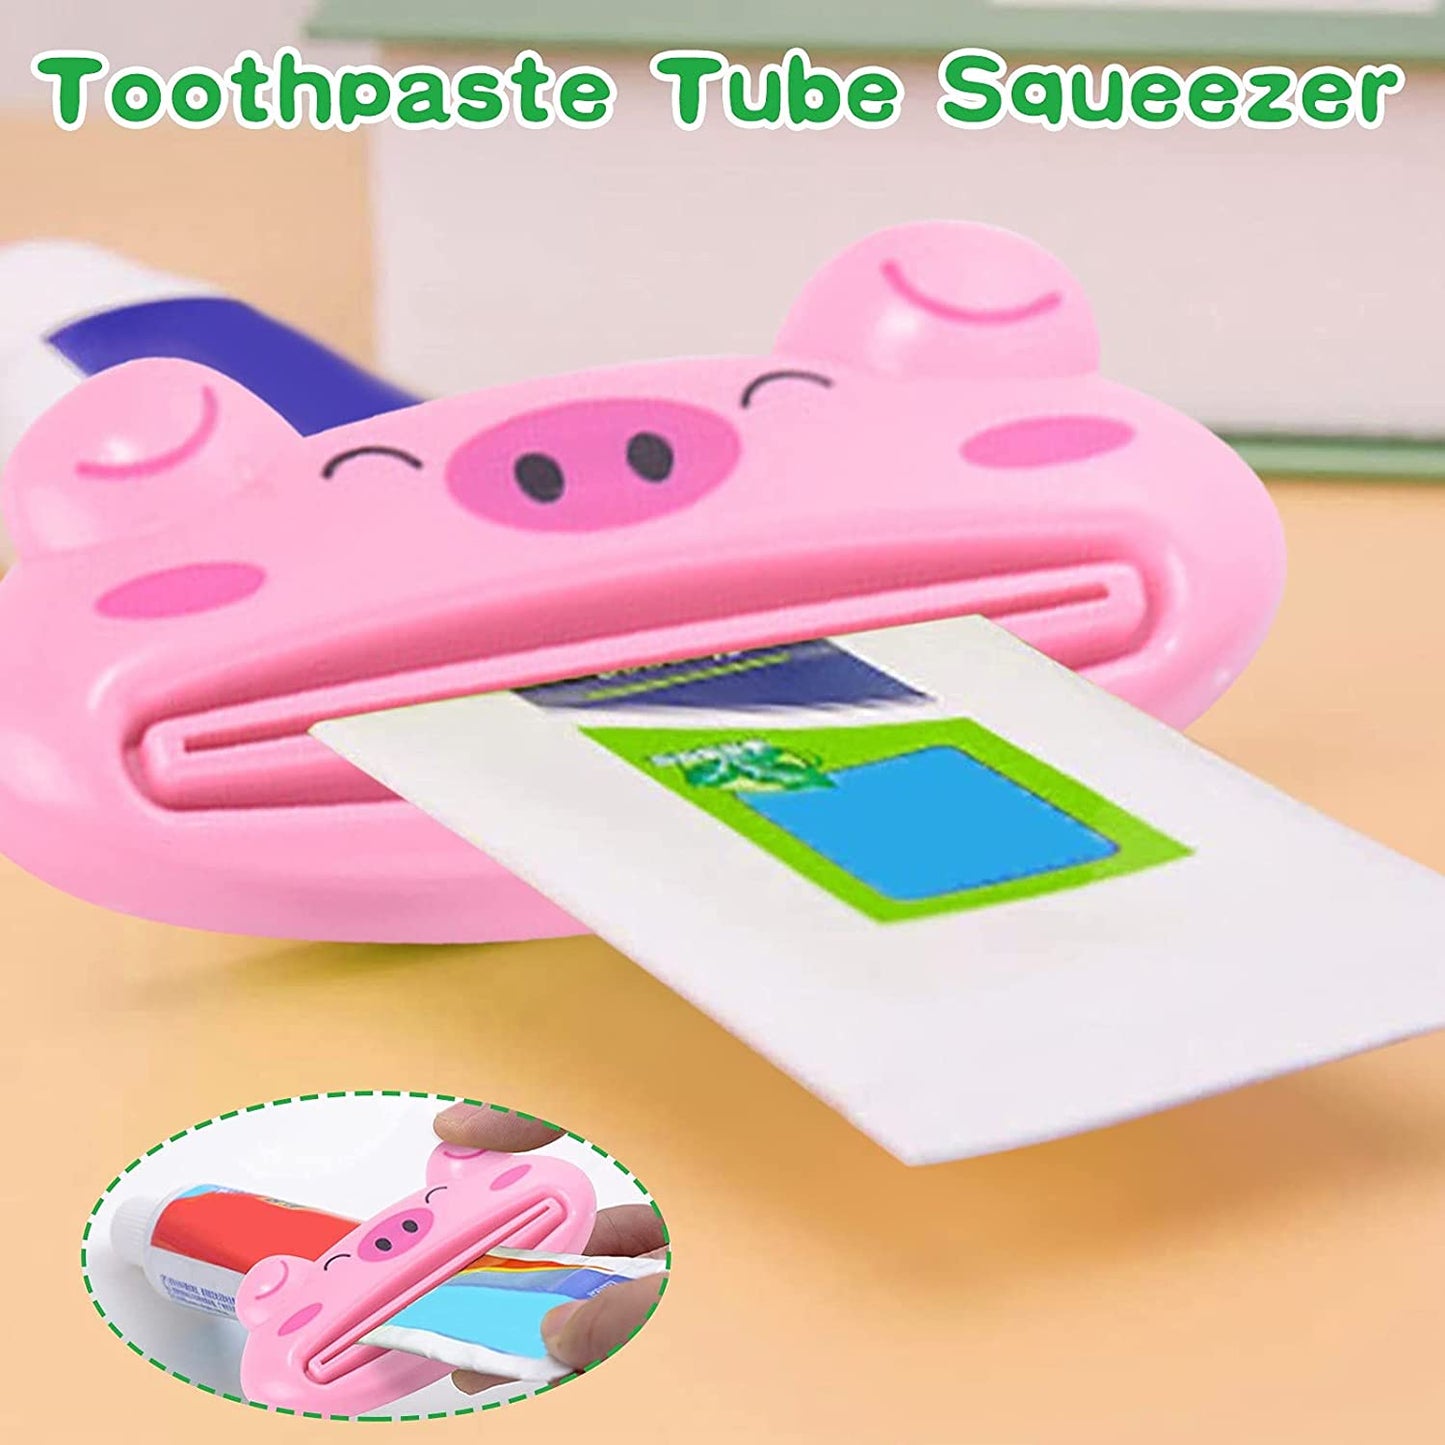 Toothpaste Tube Squeezer, 3.5inch Animal Toothpaste Squeezer Tube Squeezer Toothpaste Clip for Extruding Toothpaste Facial Washing Milk Tomato Sauce and Other Tubular Items ( 1 pc )